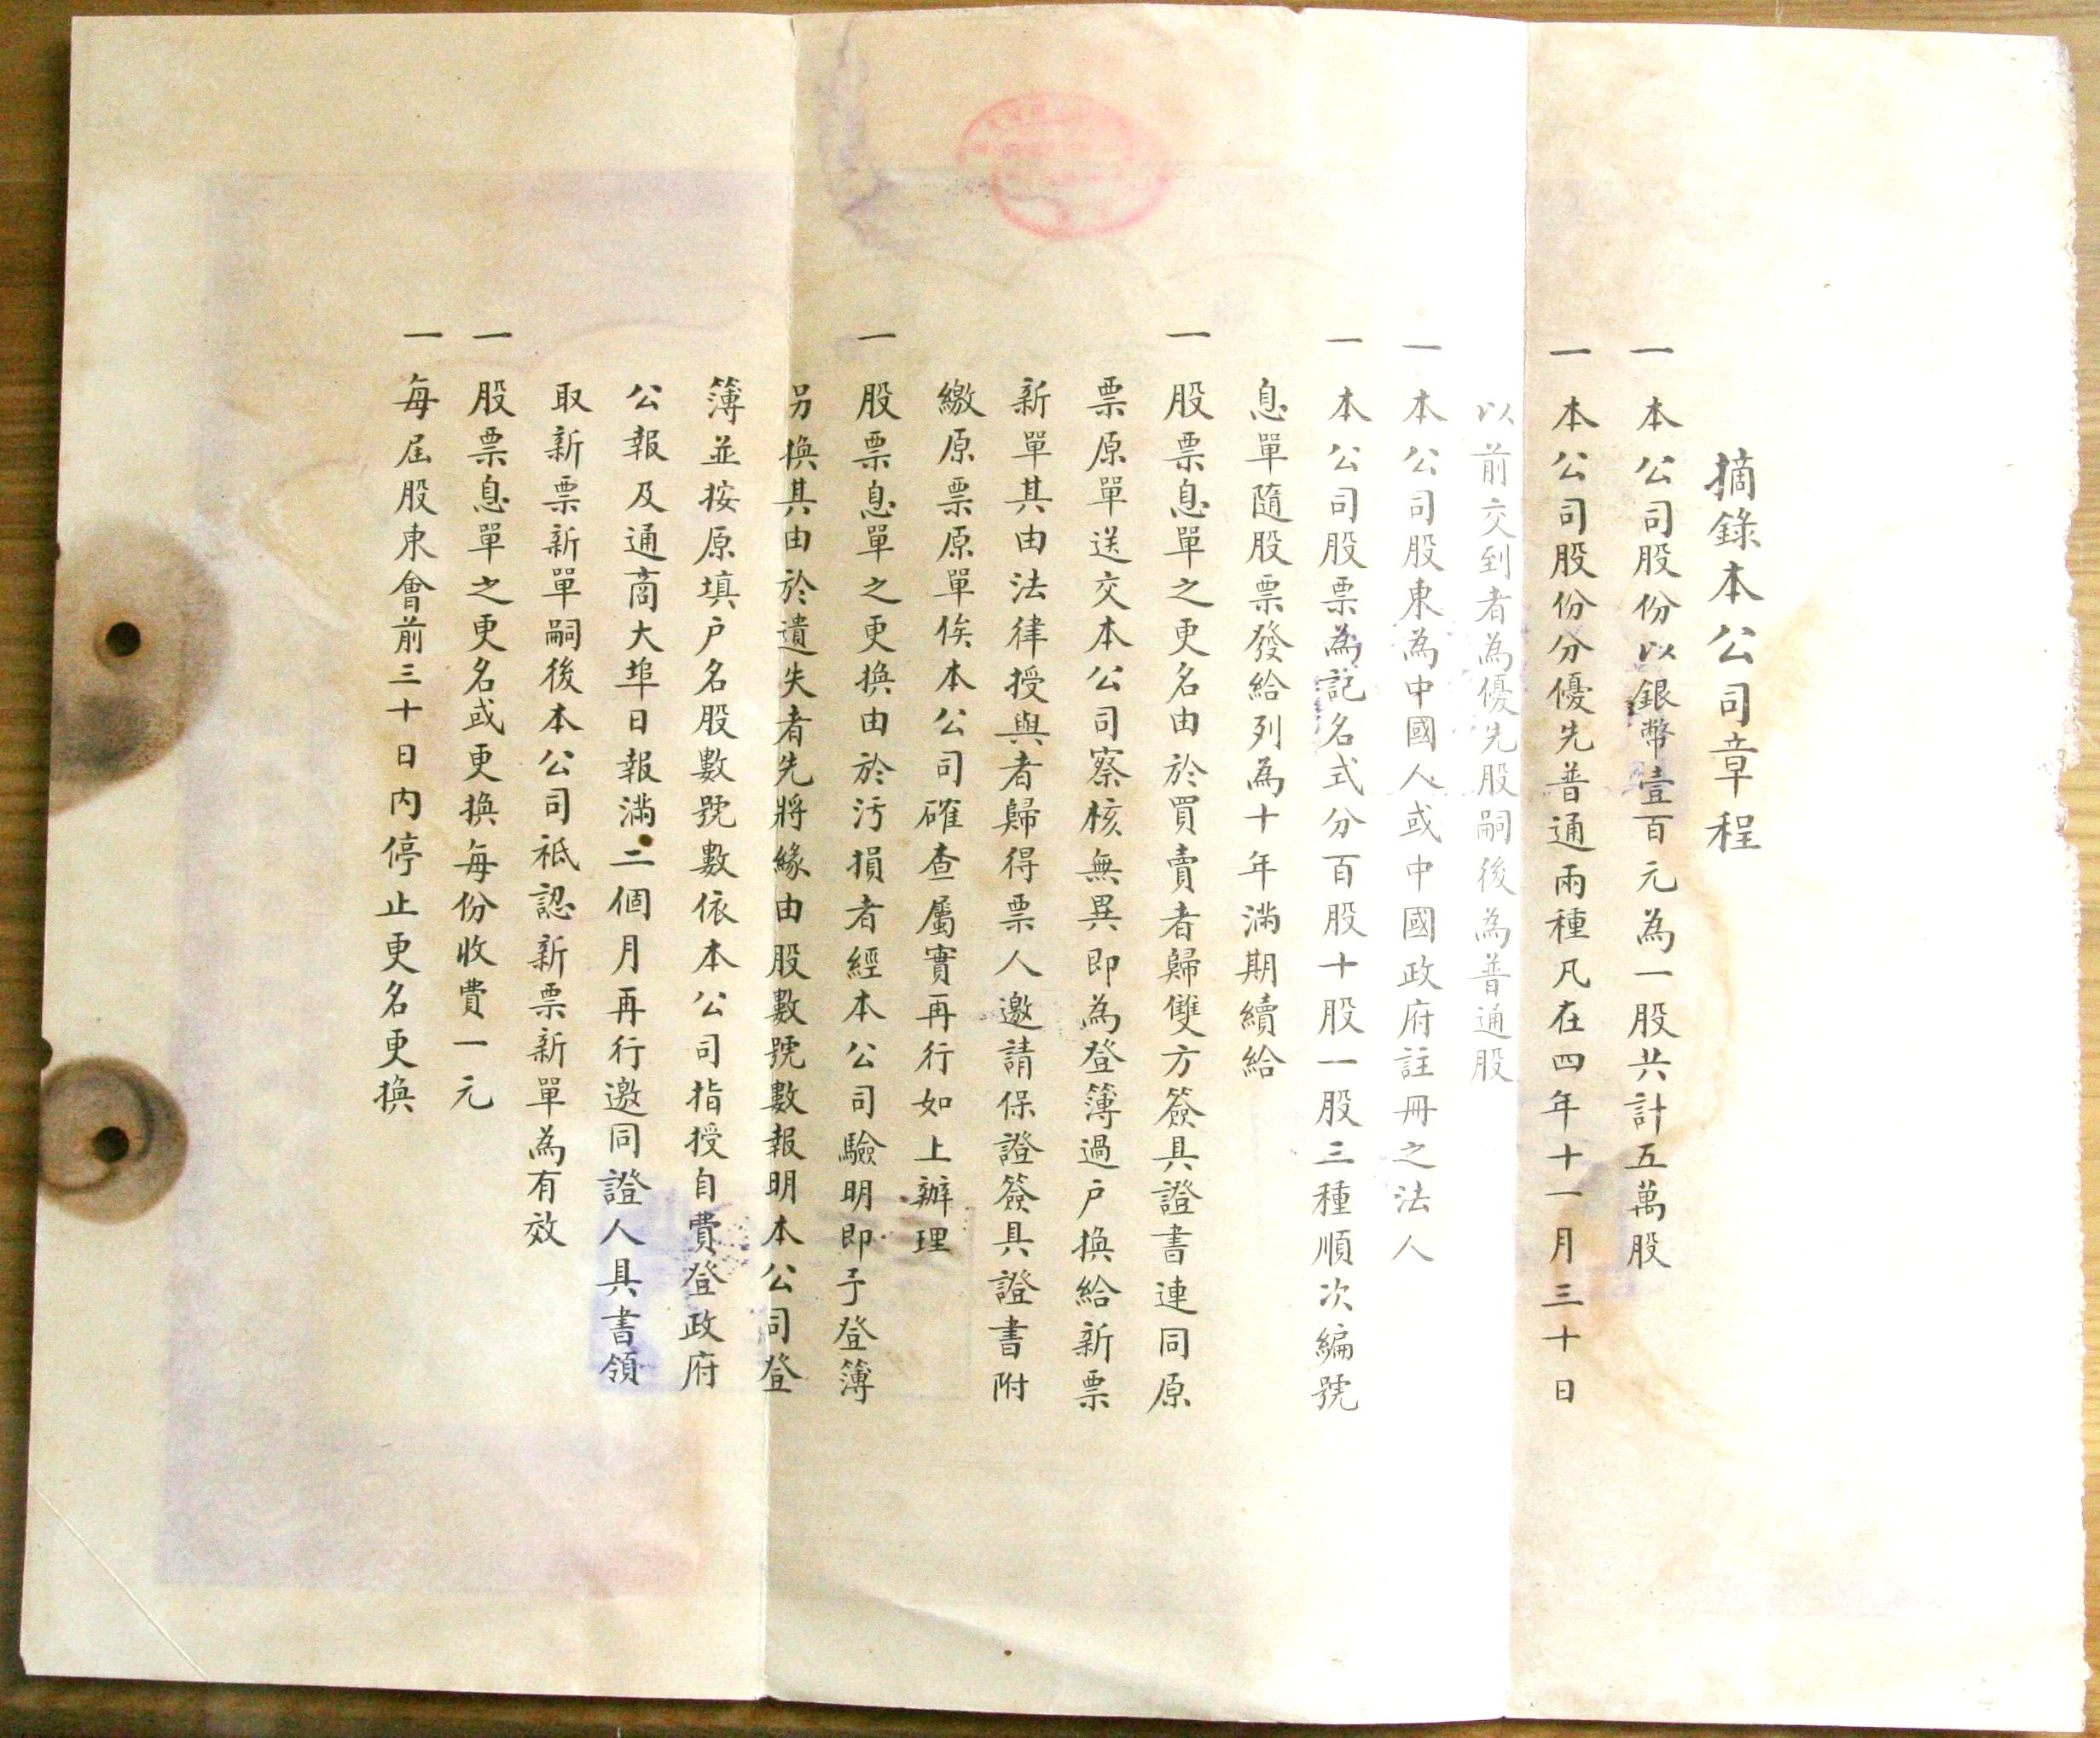 S0171, Tonghui Industries Co., Ltd, Stock of 10 Standard Shares, China 1923